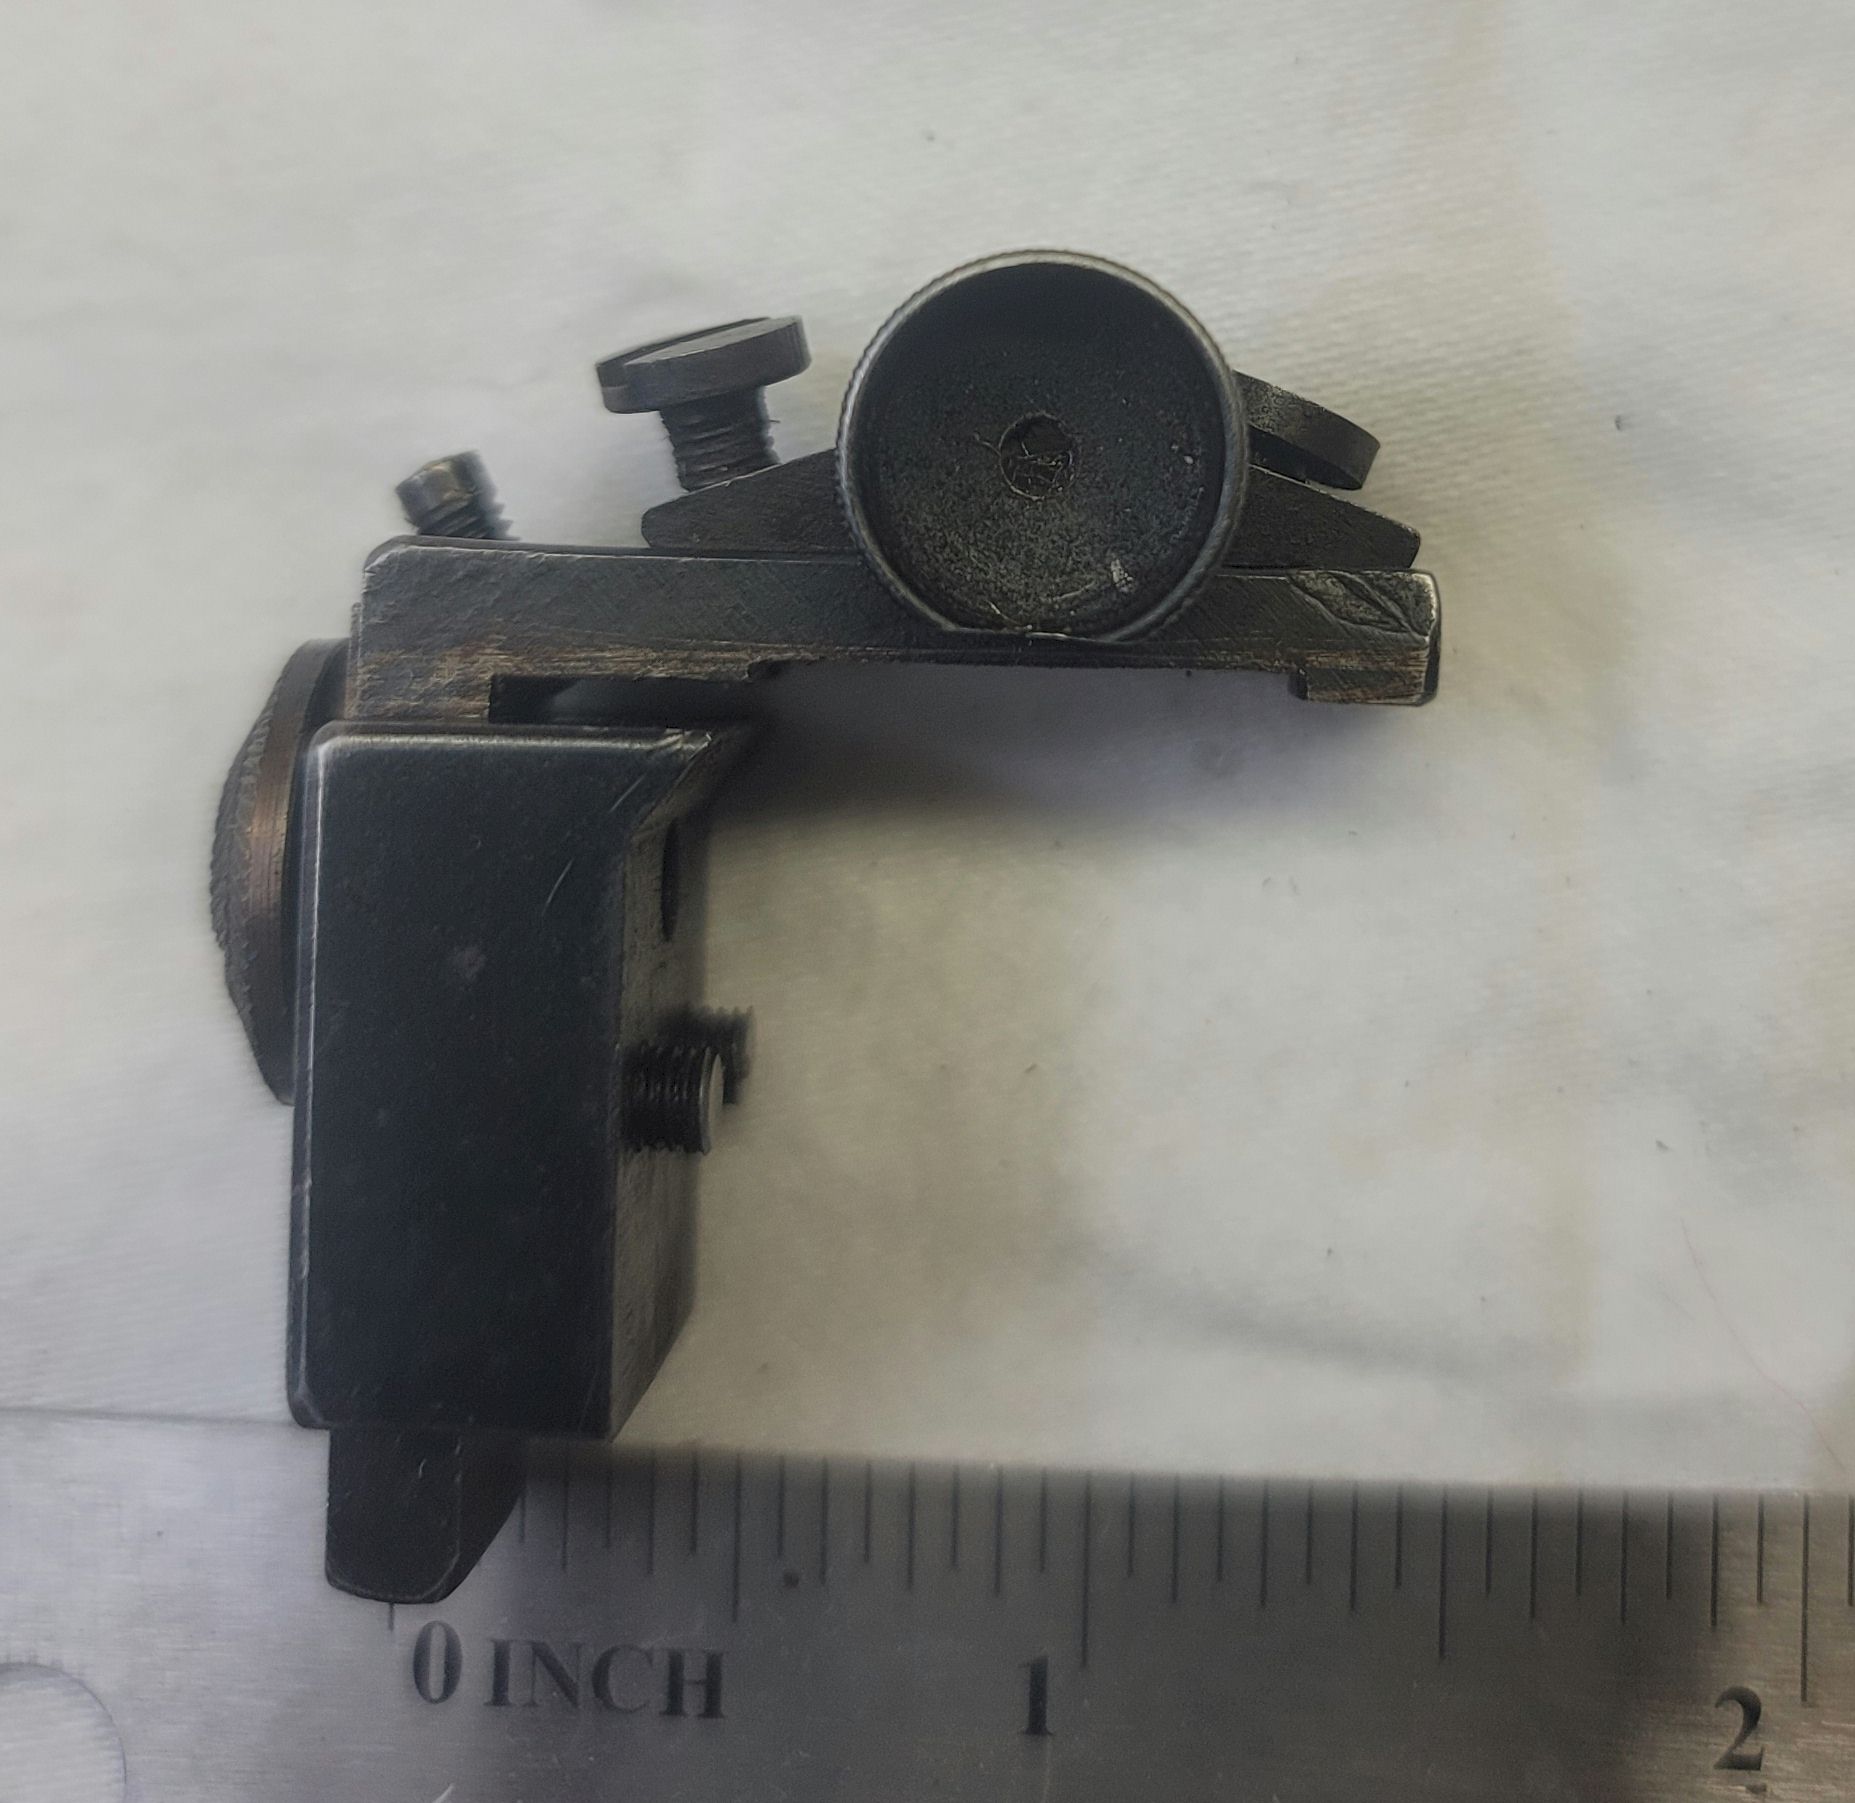 Sight - Rear Peep Redfield No. 102 for Winchester rifles